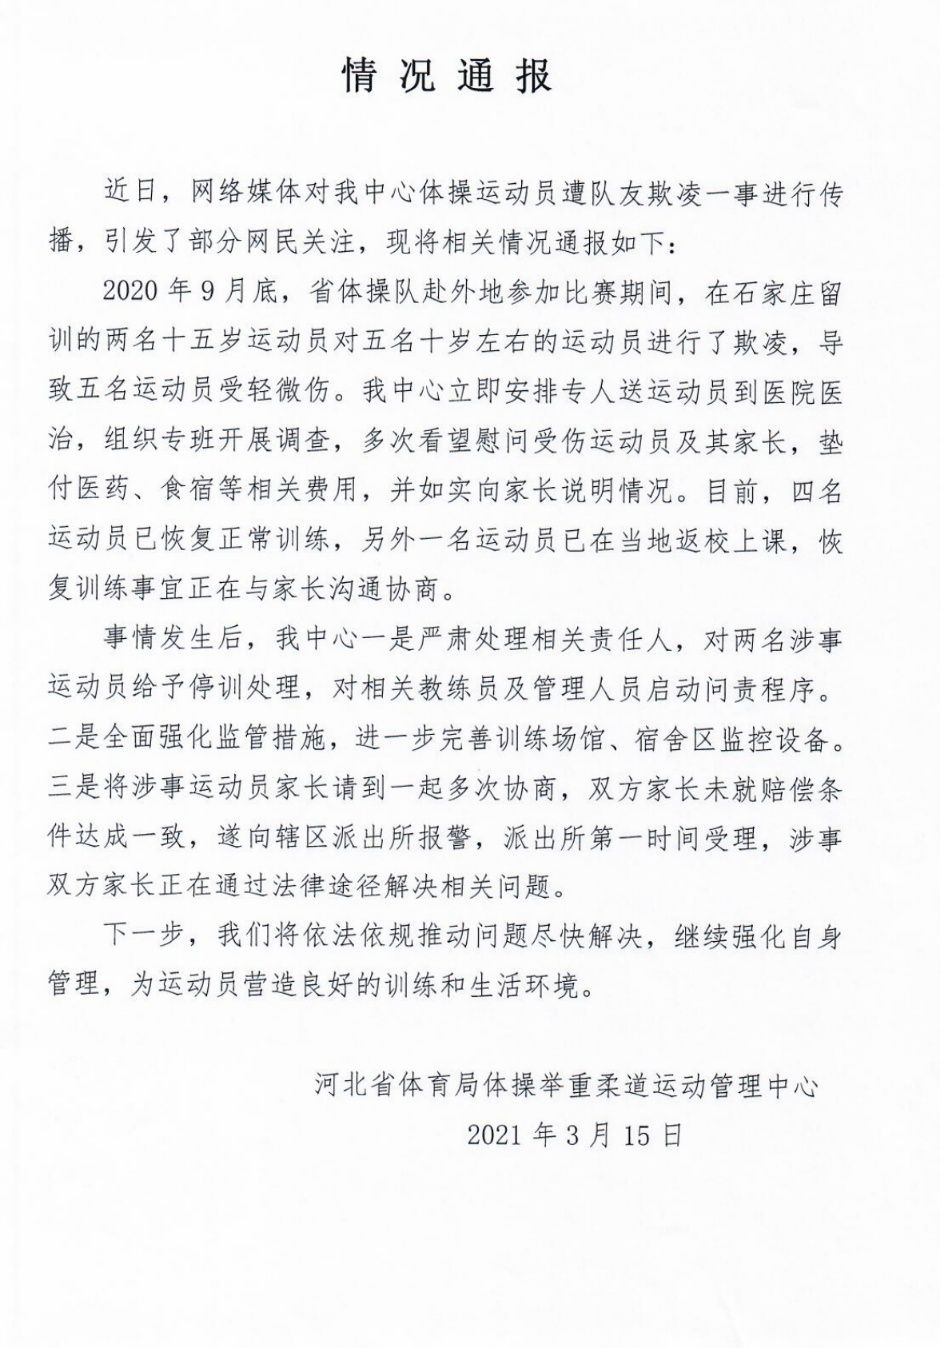 The government reports " 5 young athletes of Heibei meet with ride roughshod over " : 5 people suffer slight injury parent to solving a problem through legal approach